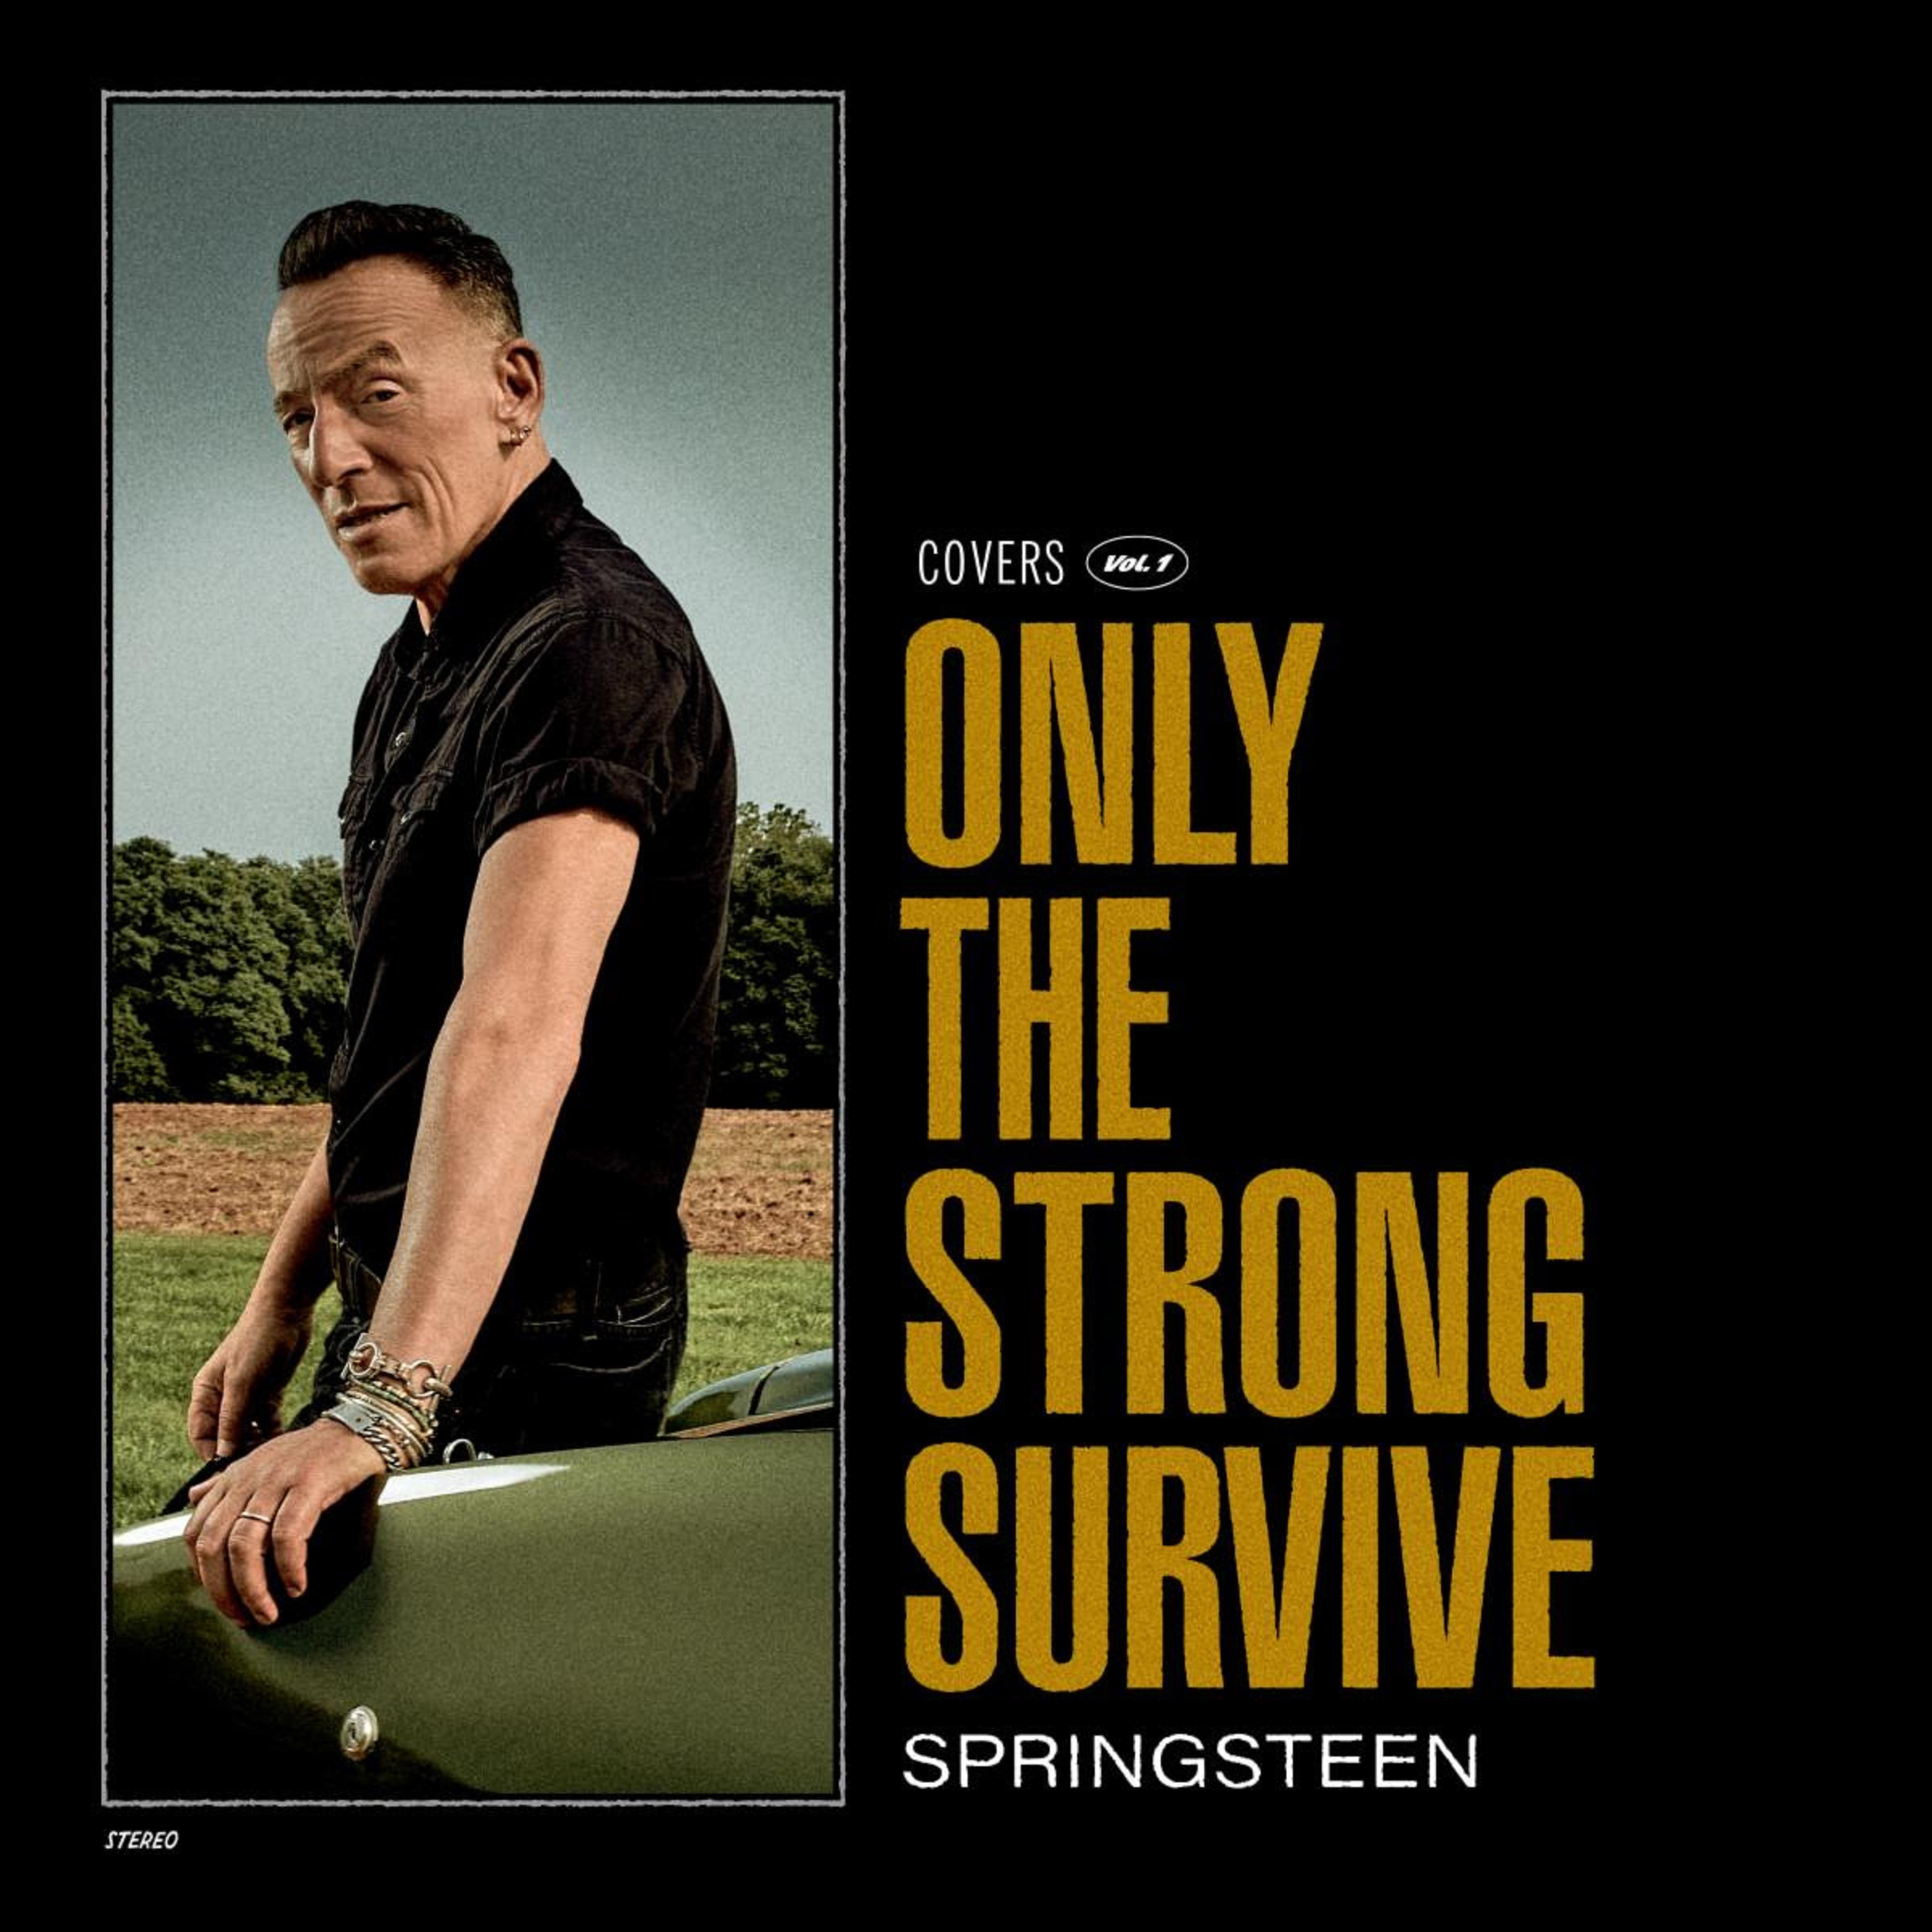 Bruce Springsteen's Celebration Of Soul Music 'Only The Strong Survive' Out Today